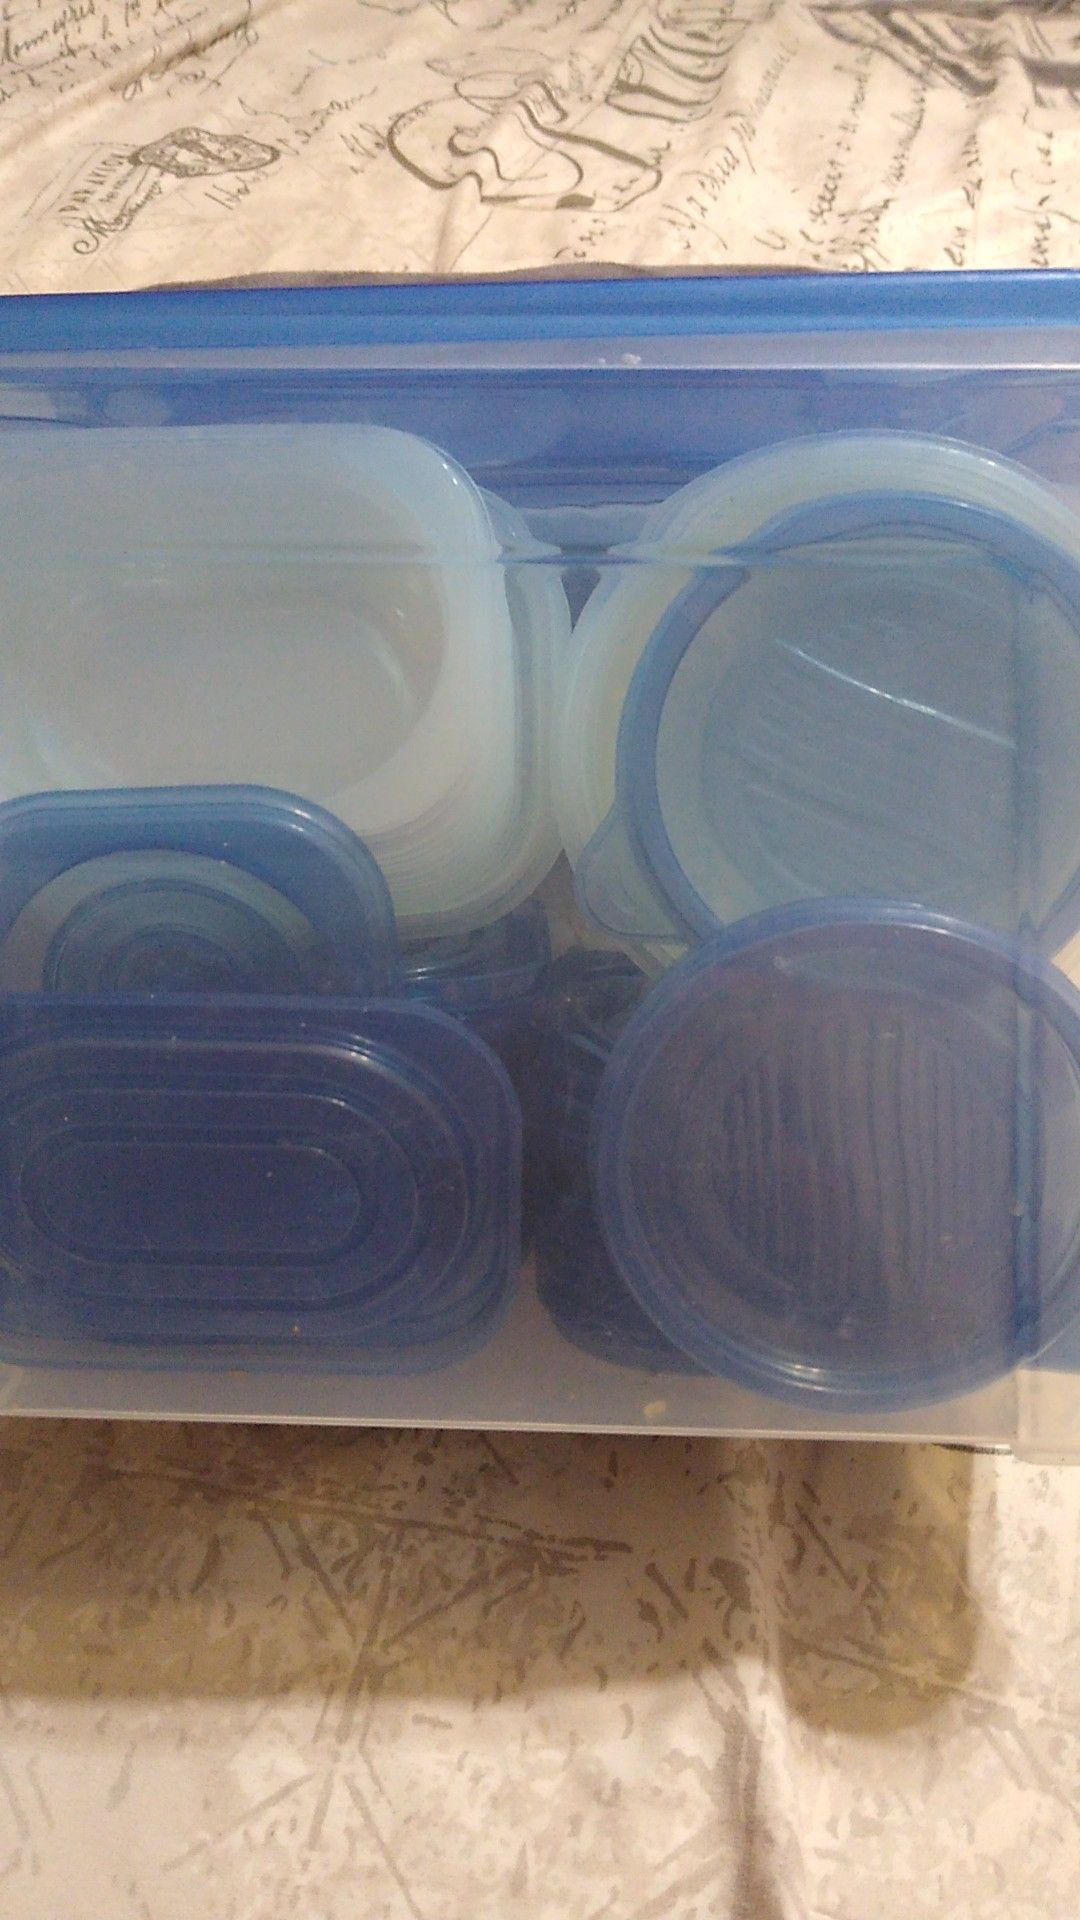 Plastic food containers with Storage.